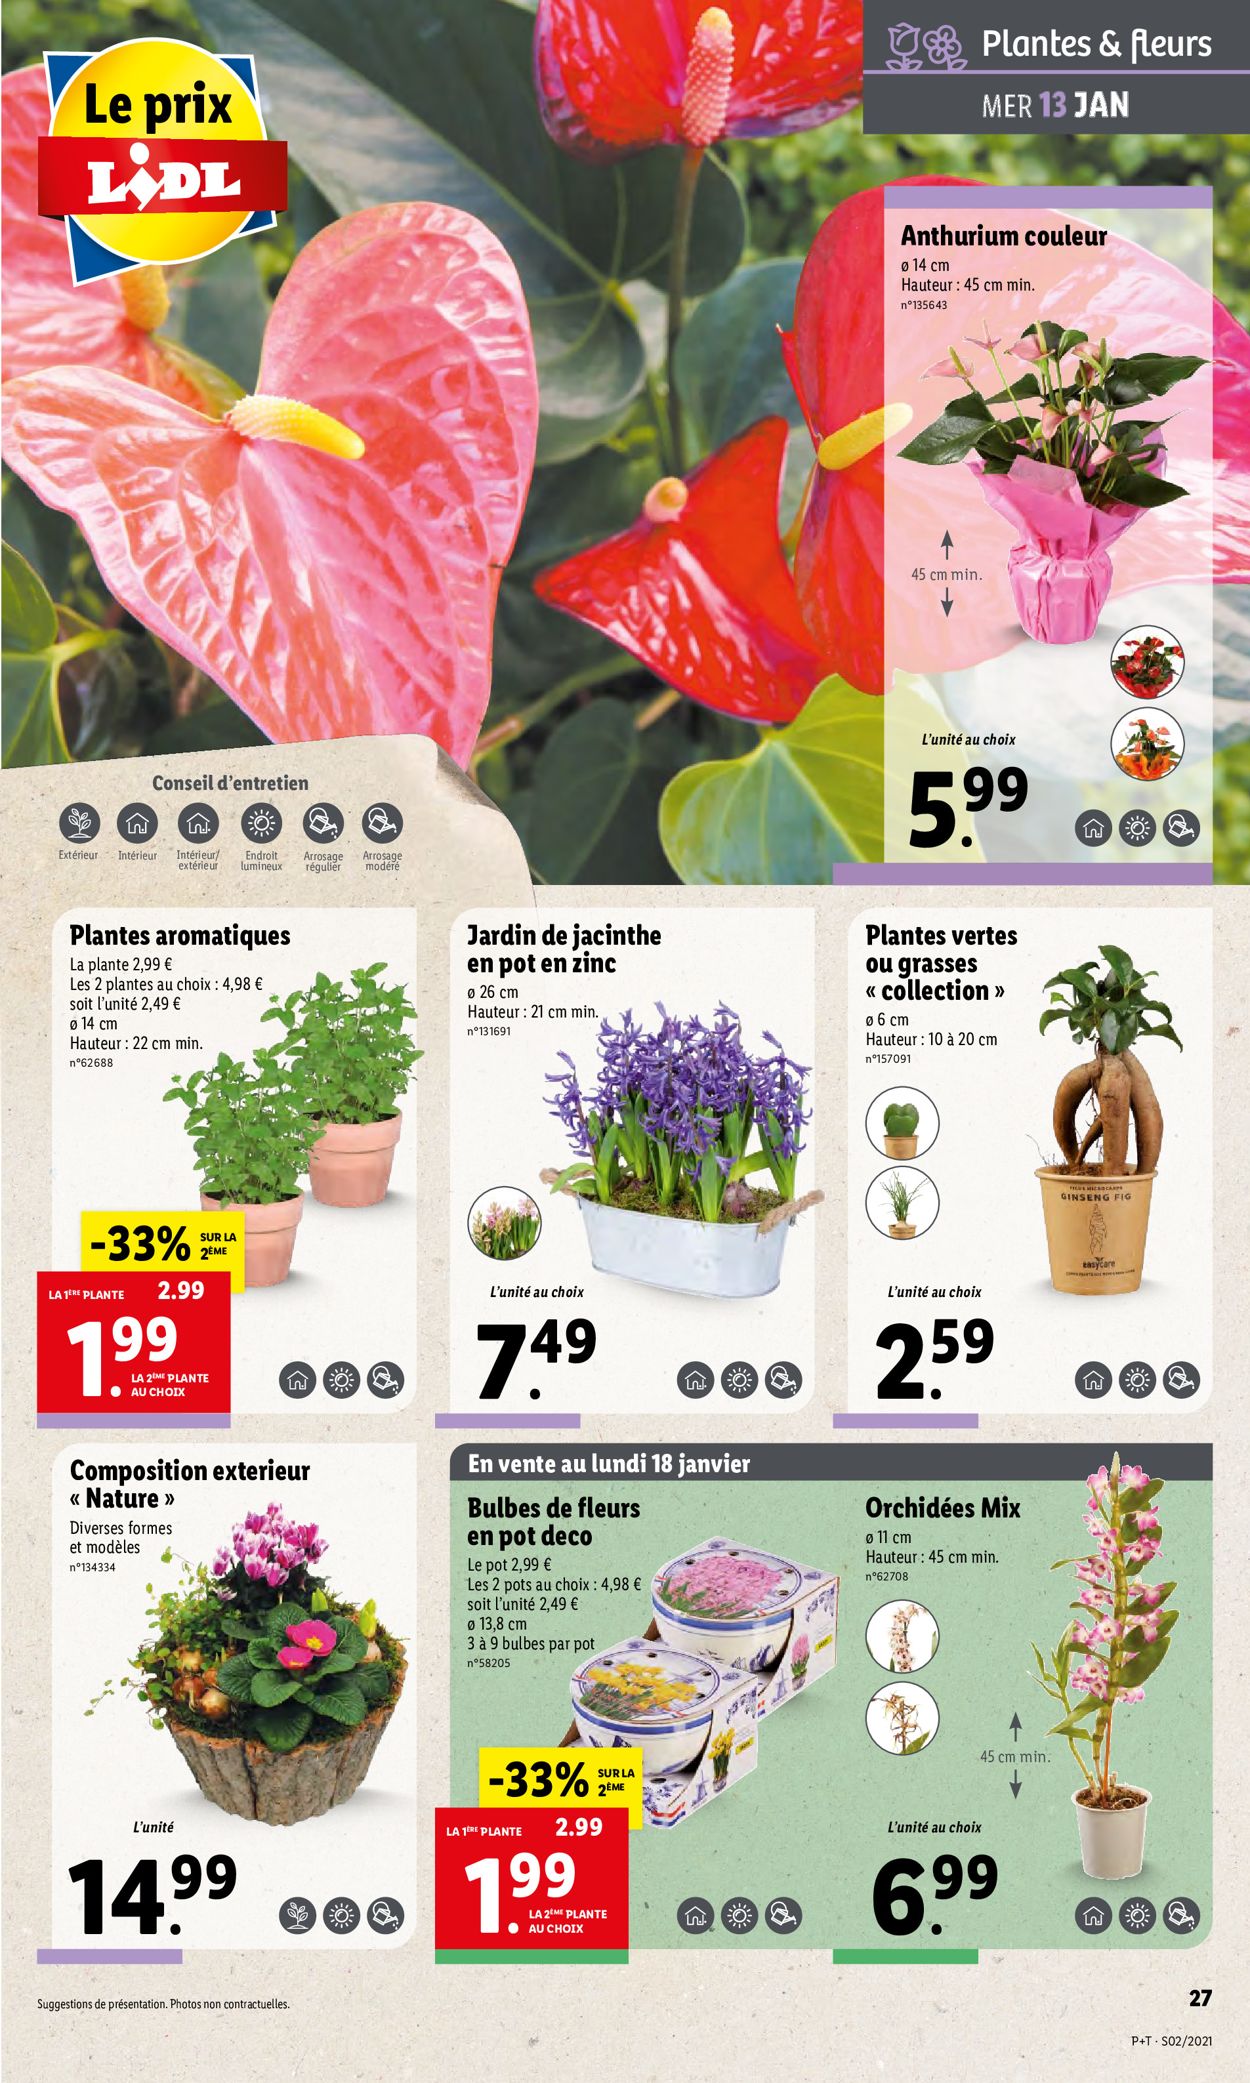 Lidl Catalogue - 13.01-19.01.2021 (Page 27)